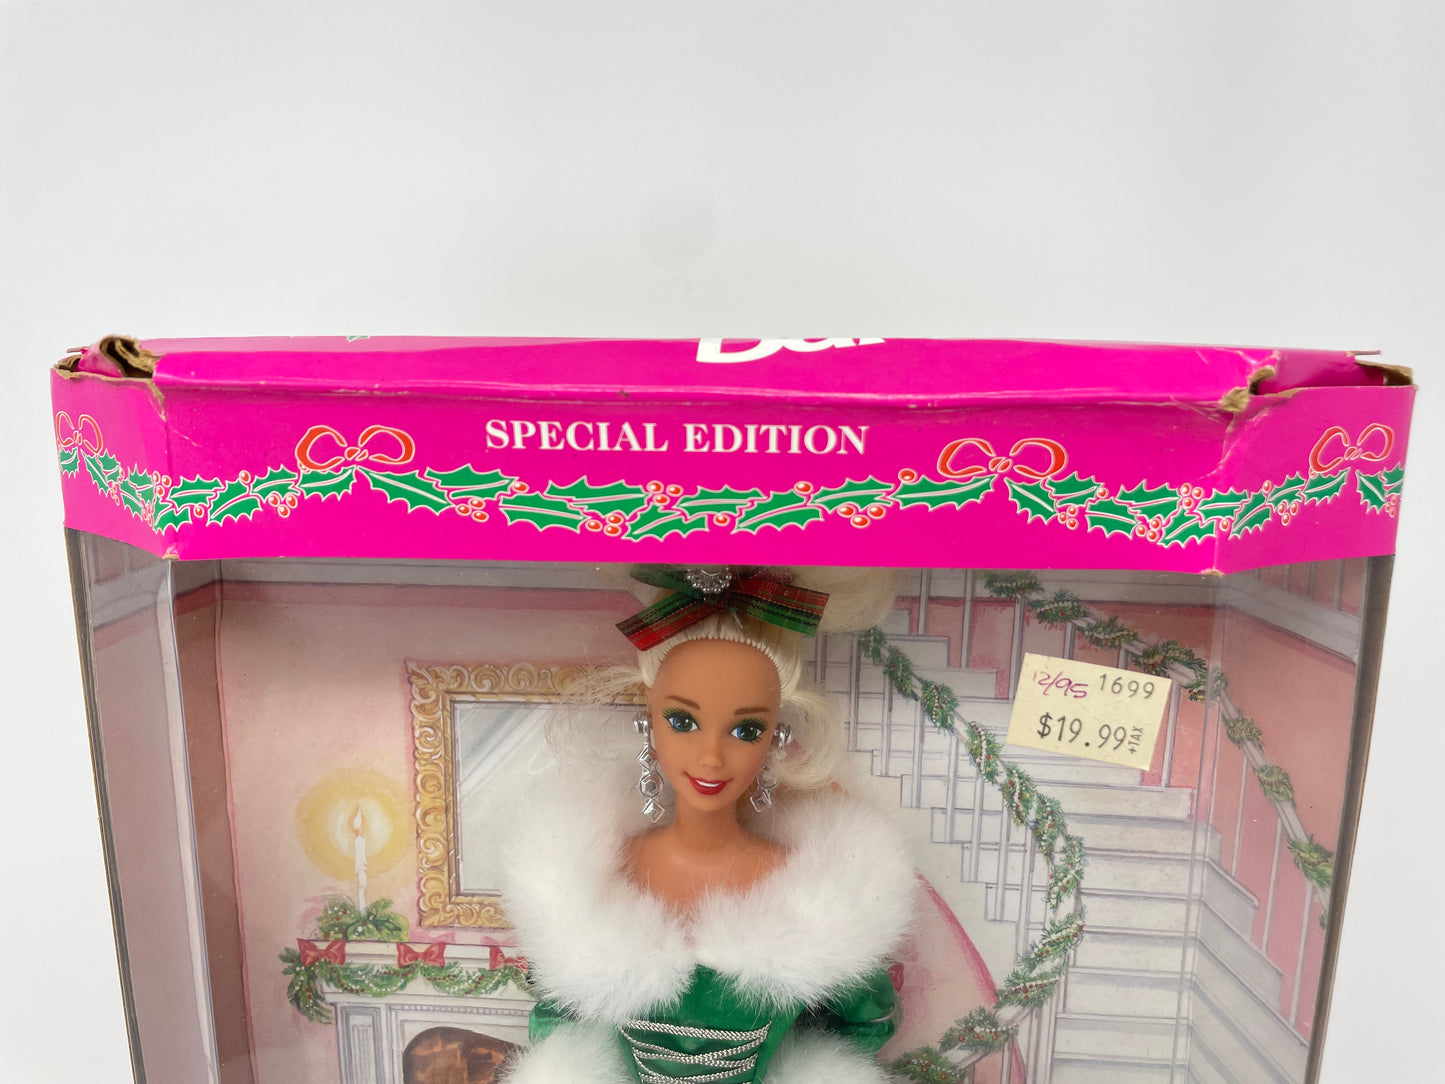 WINTERS EVE BARBIE - SPECIAL EDITION - #13613 - 1994 MATTEL